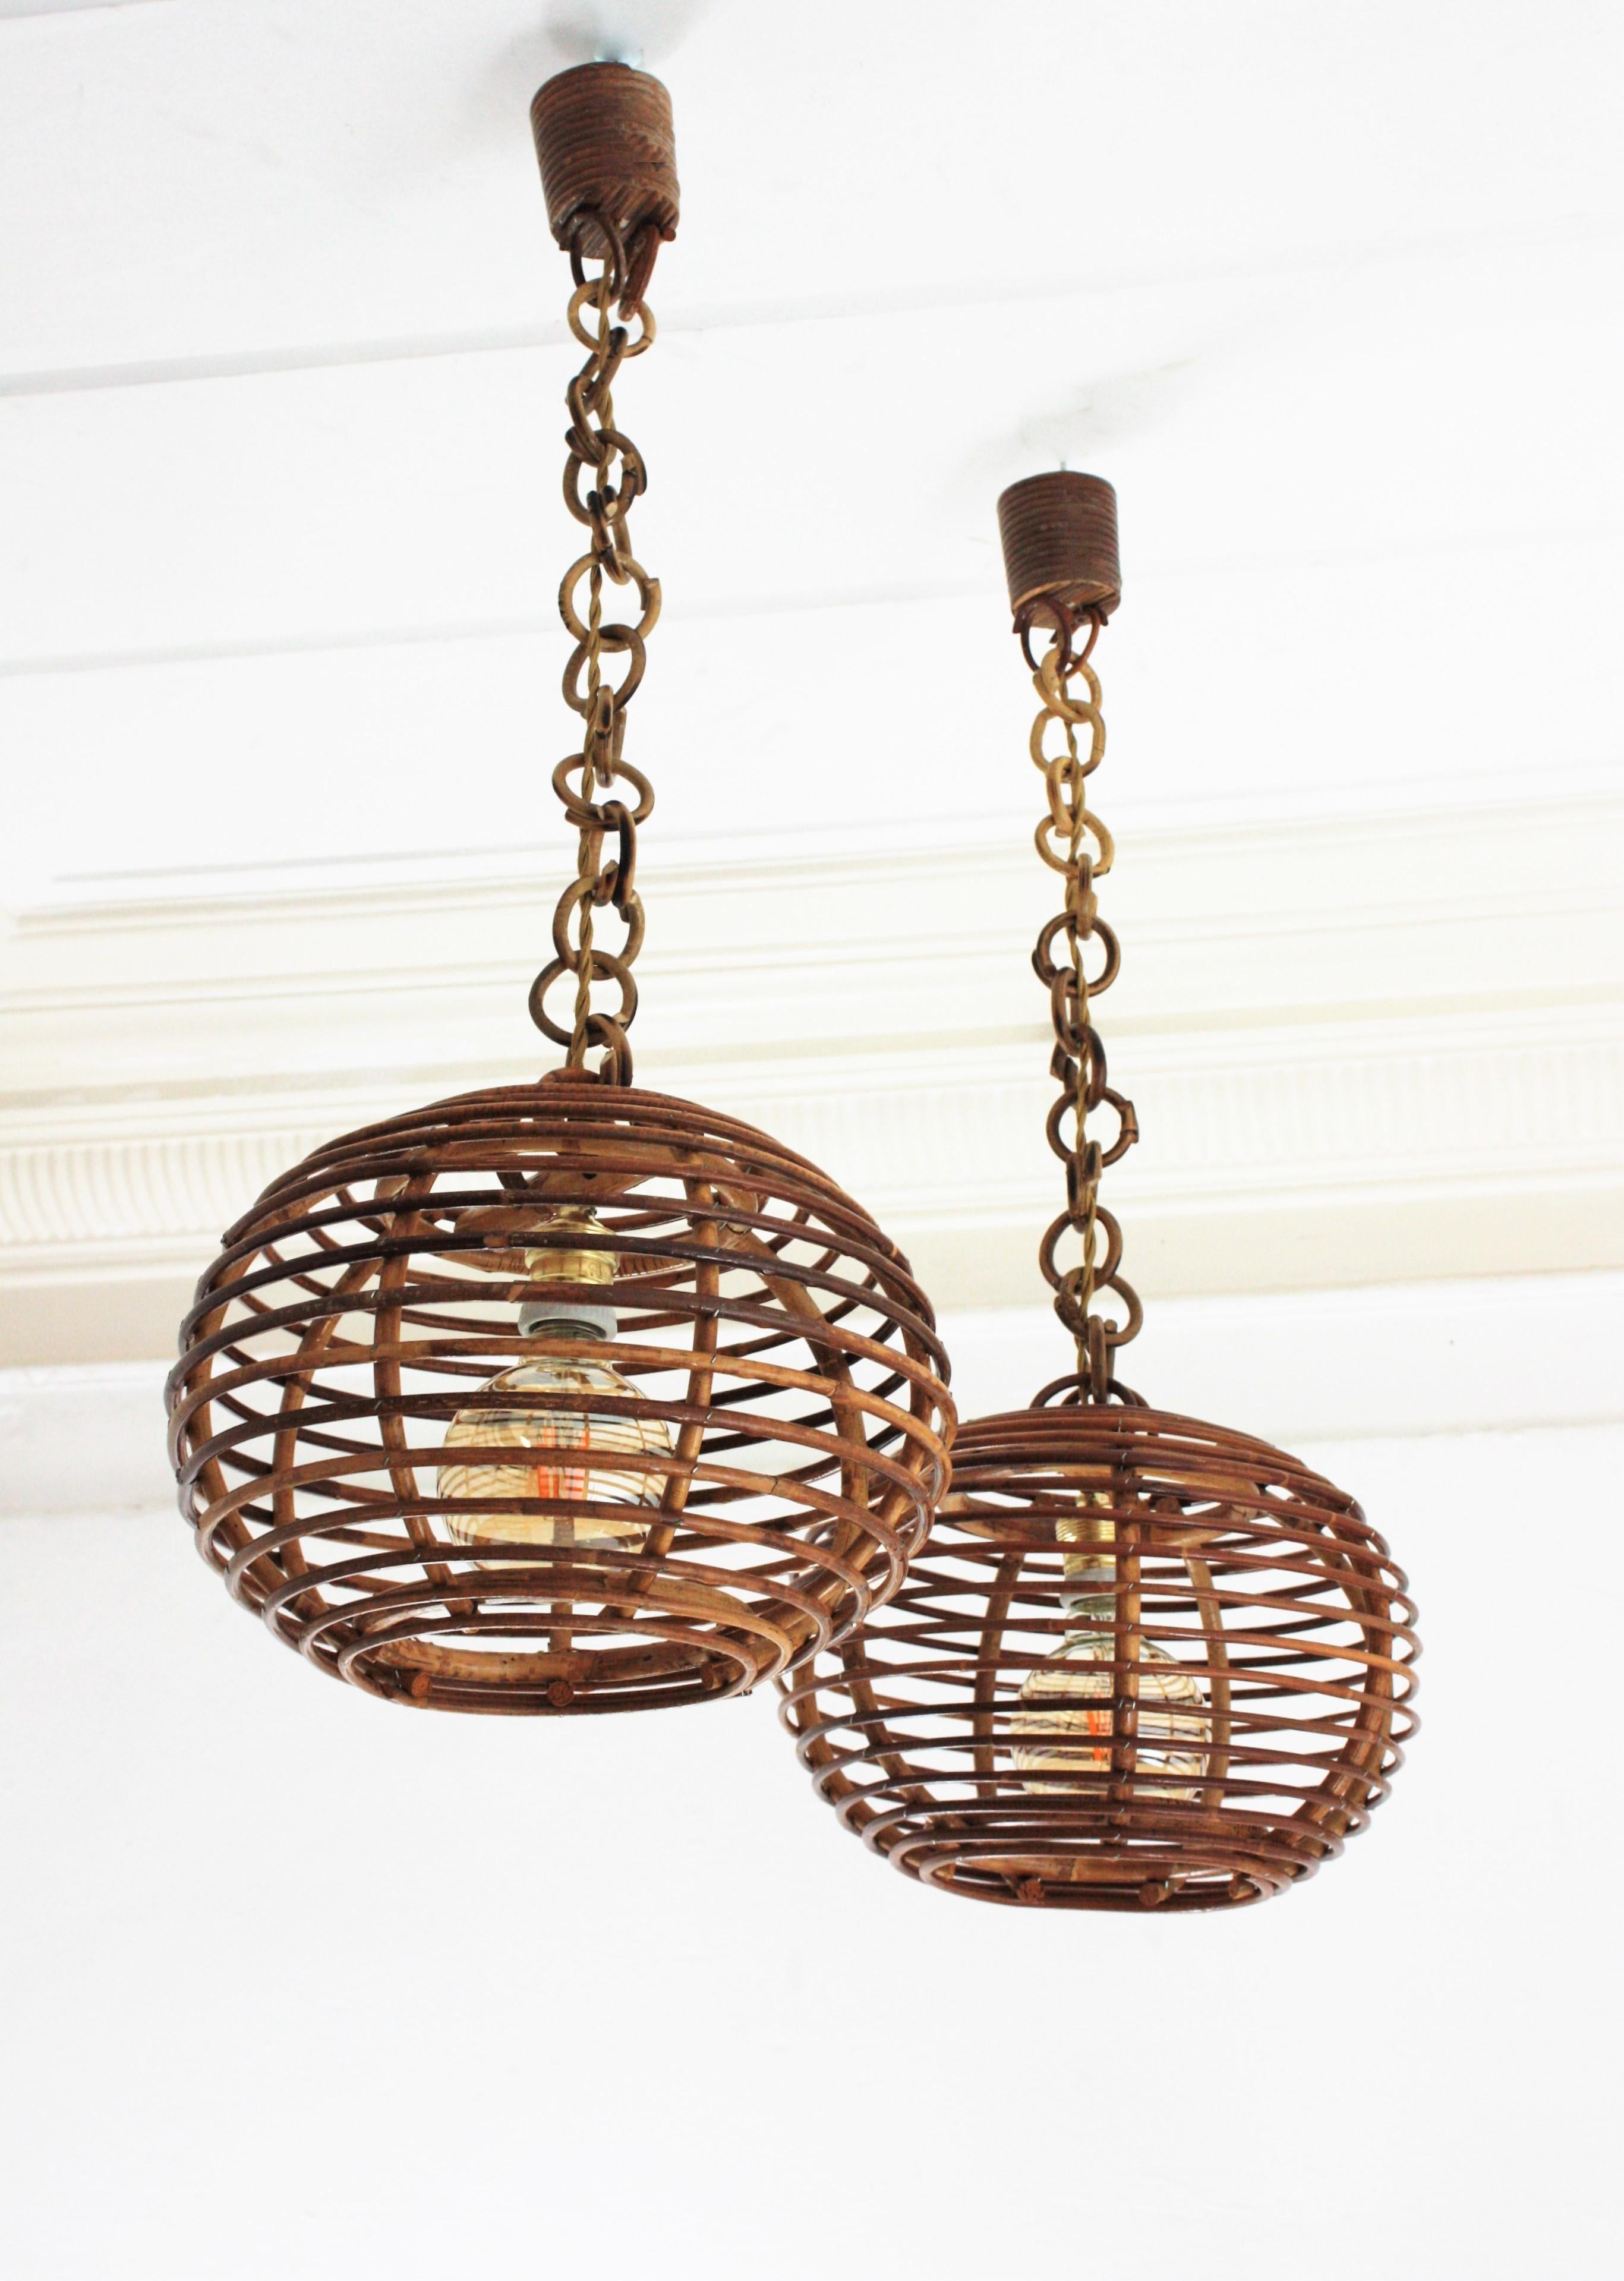 Eye-catching pair of rattan lanterns with globe or ball shaped lampshades, Spain, 1950-1960s.
These suspension lamps are entirely handcrafted with rattan, bamboo and wicker. The ball shaped shades hang from chains with round rattan links that can